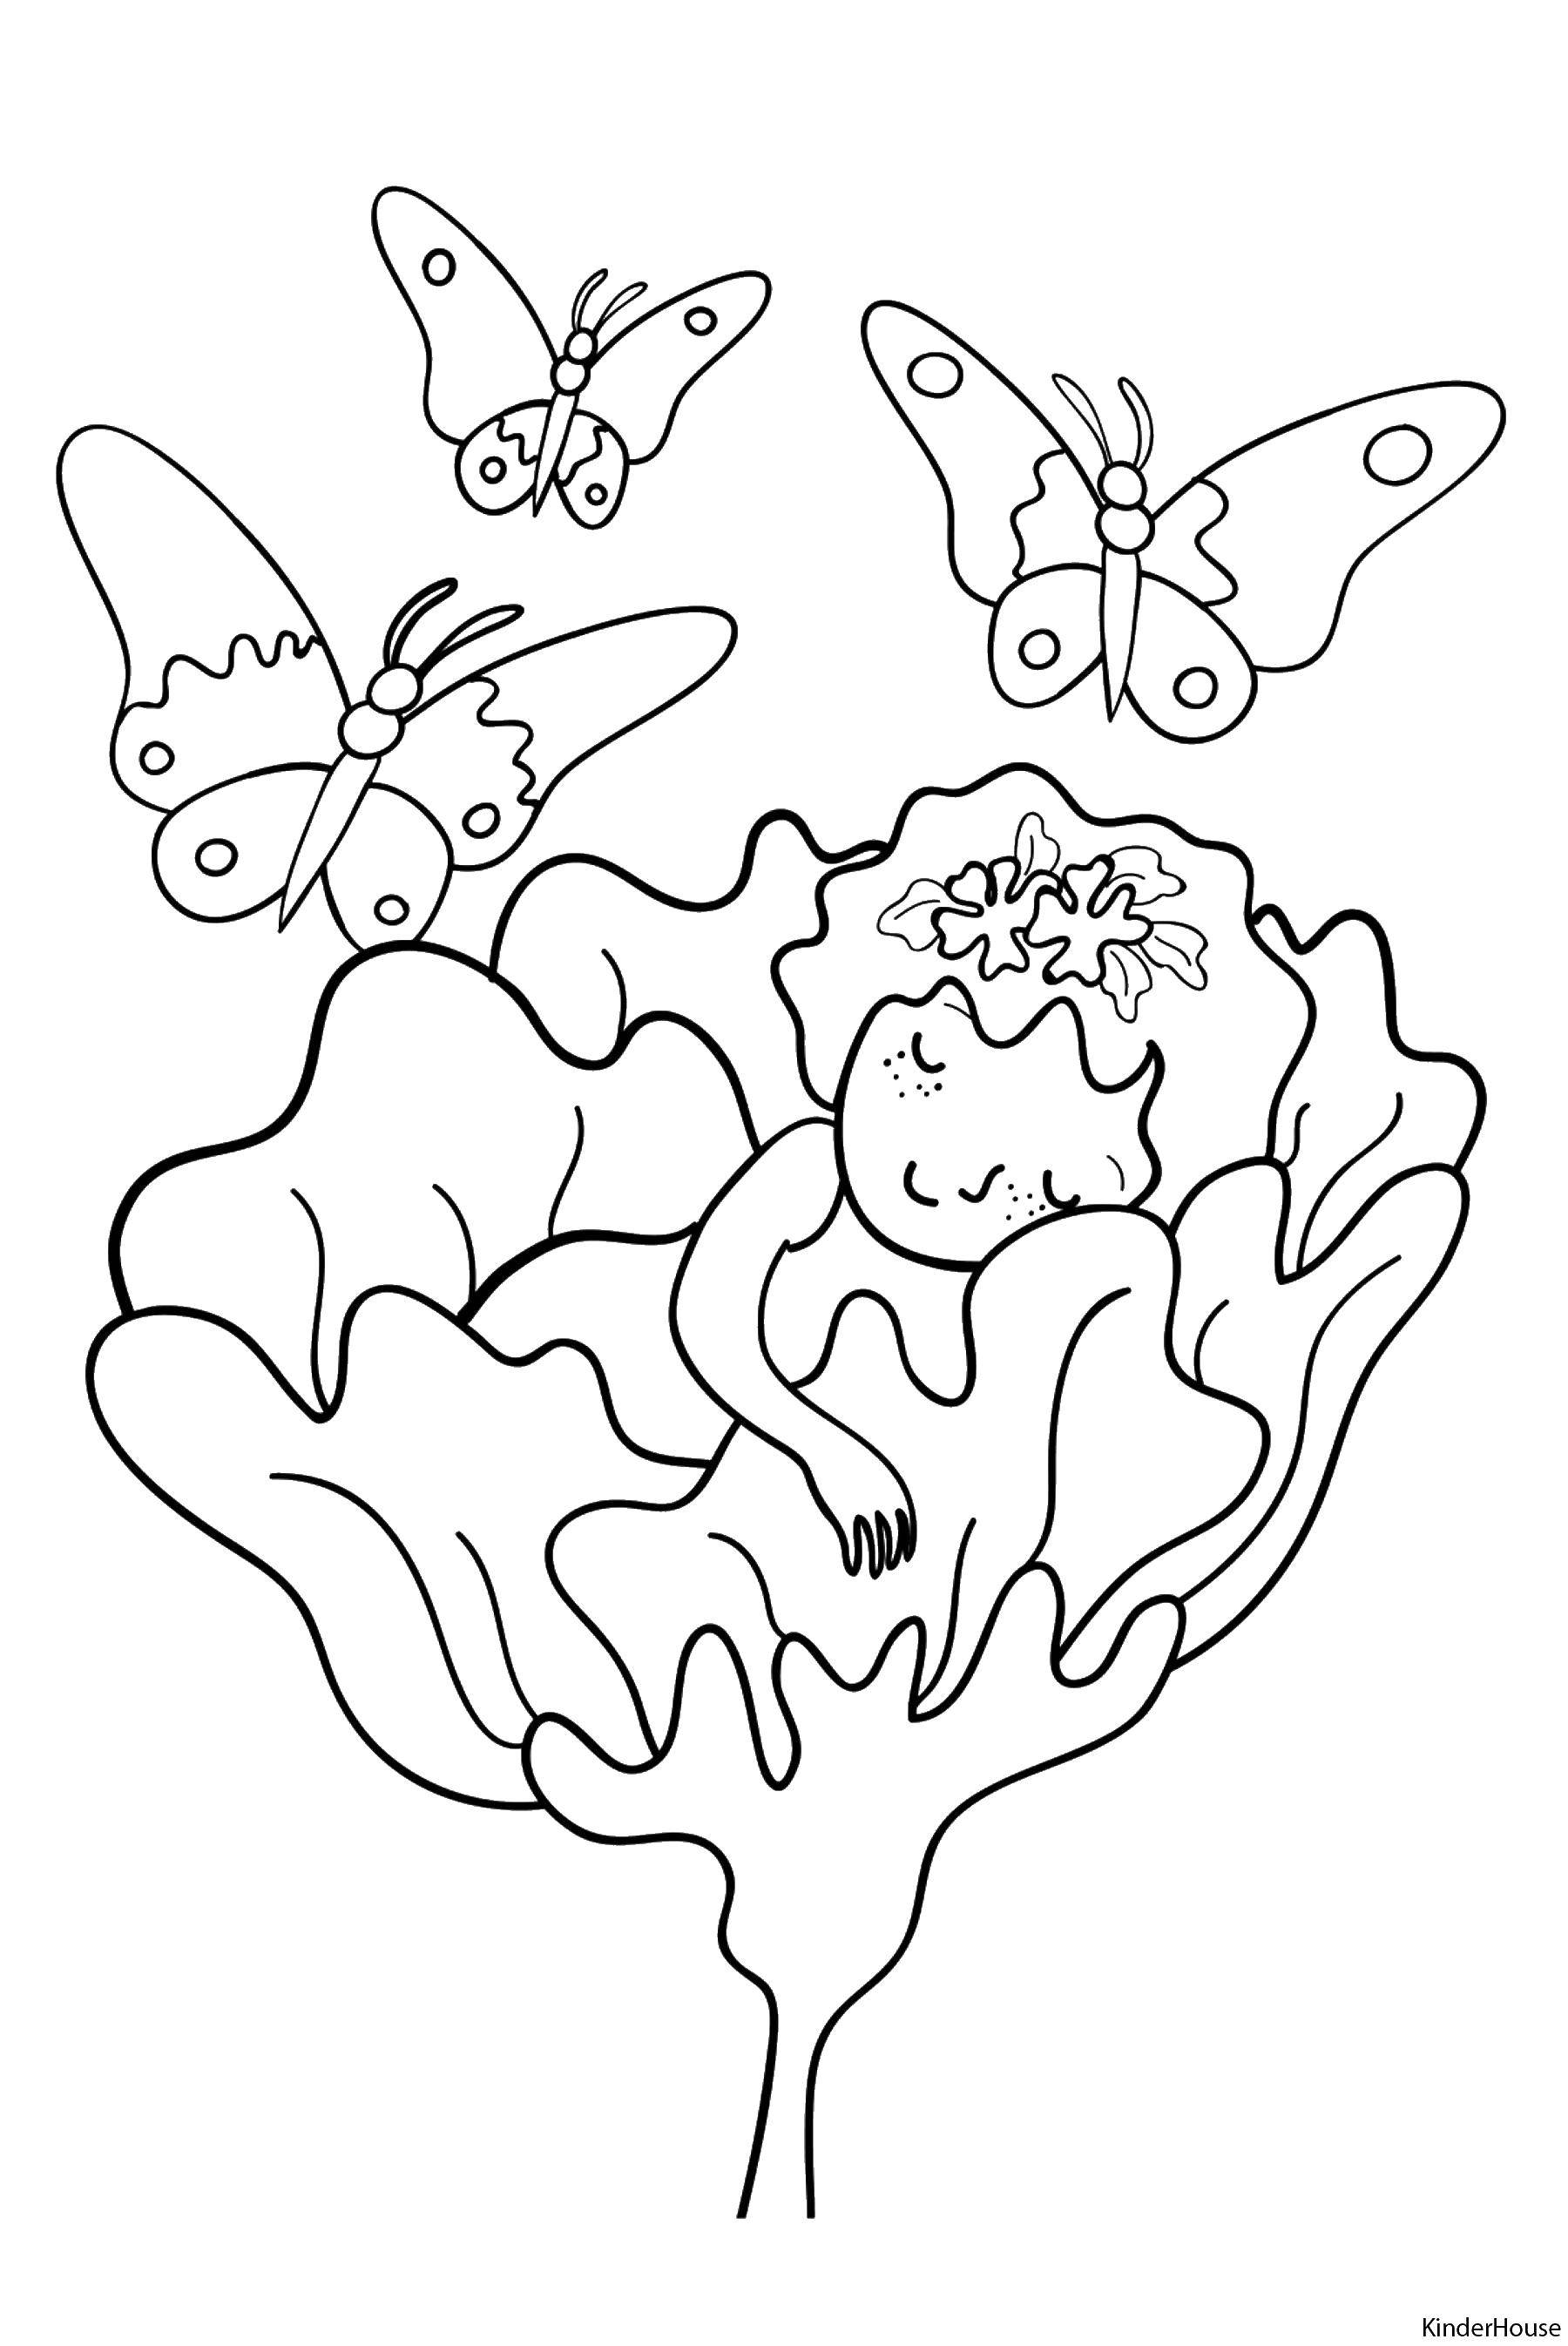 Coloring Thumbelina in the flower. Category For girls. Tags:  girl, flower, butterfly.